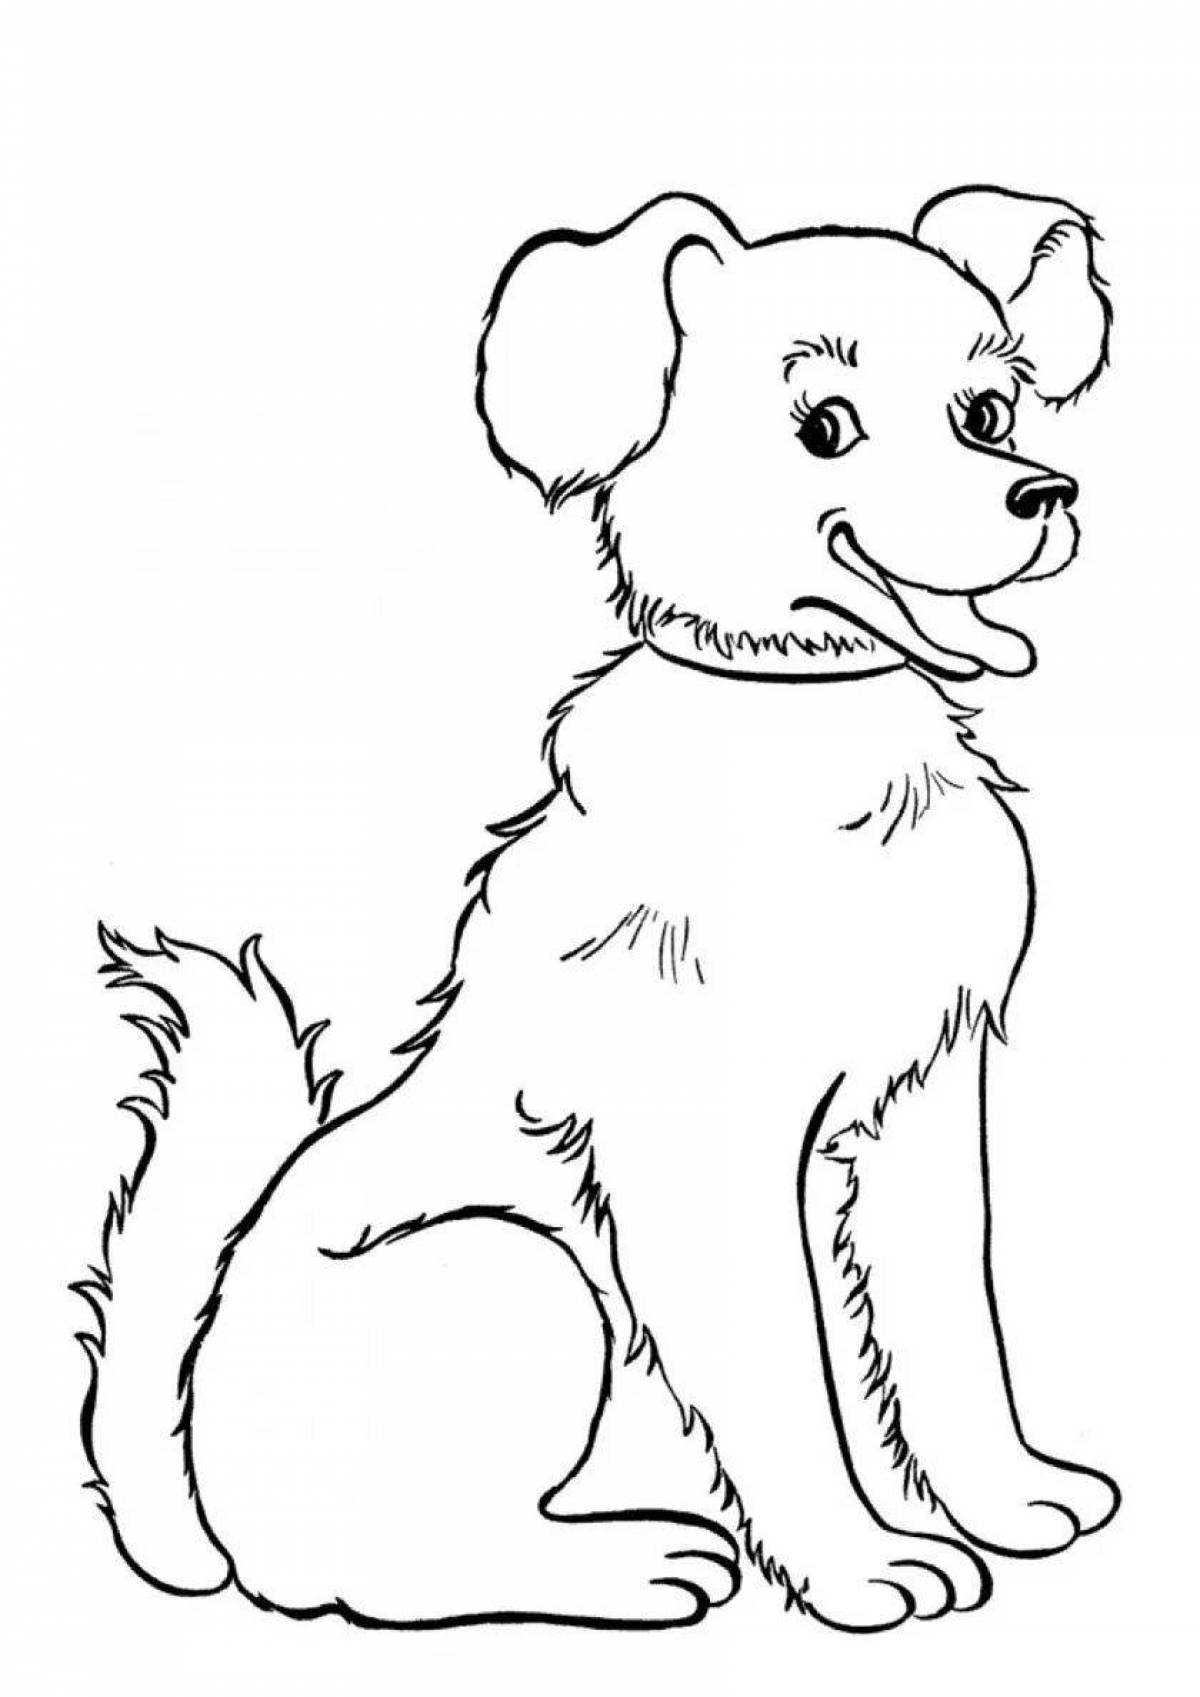 Cute dog coloring book for kids 6-7 years old